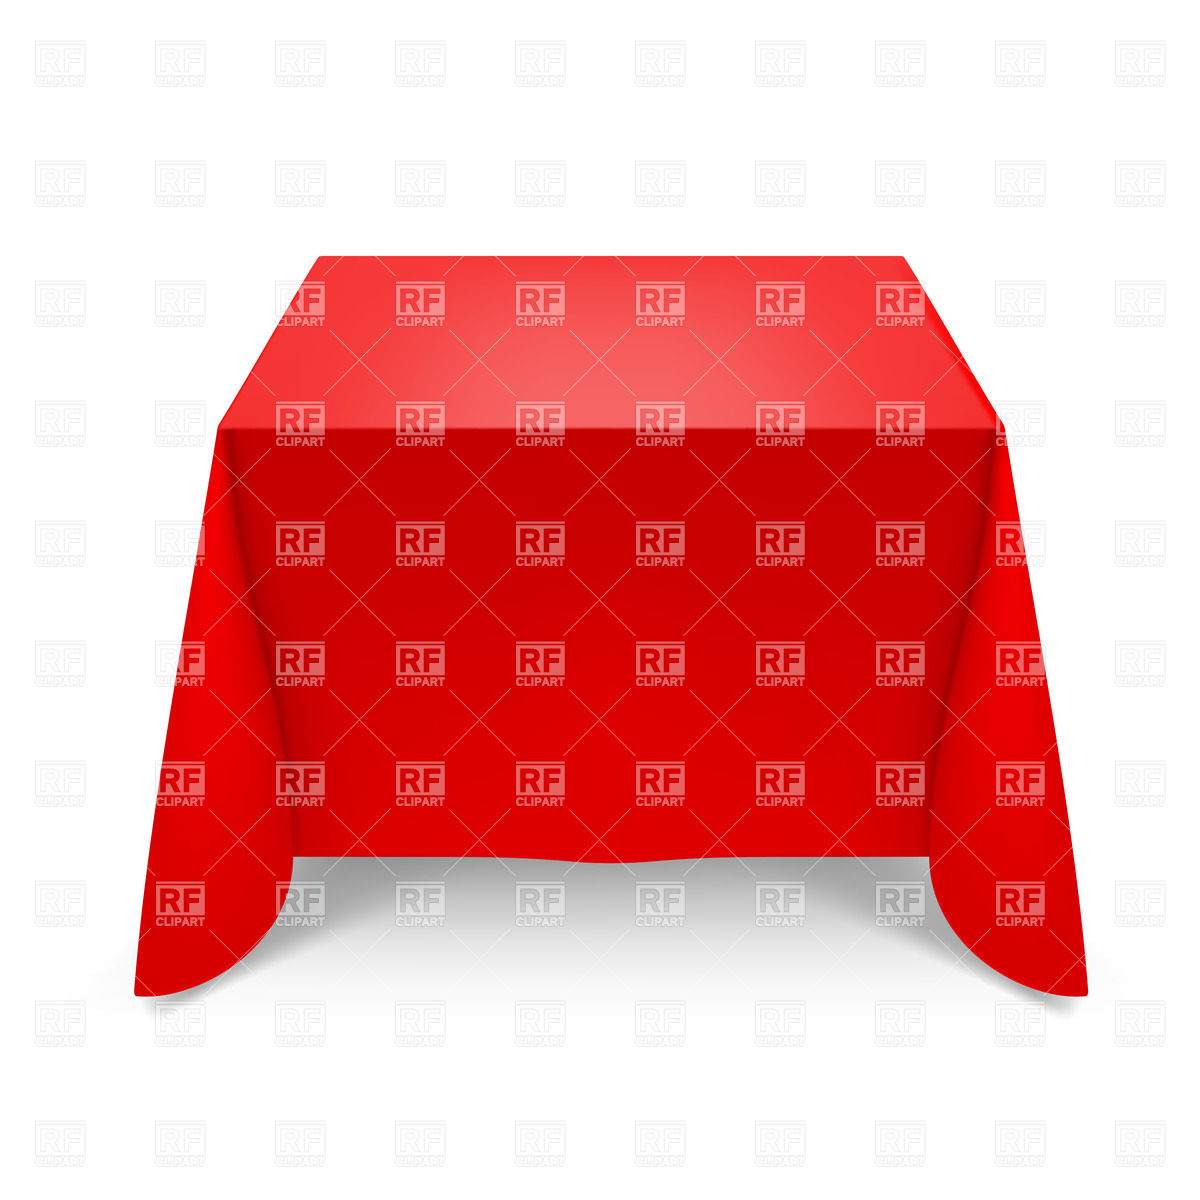 Red Tablecloth On Square Table Download Royalty Free Vector Clipart    